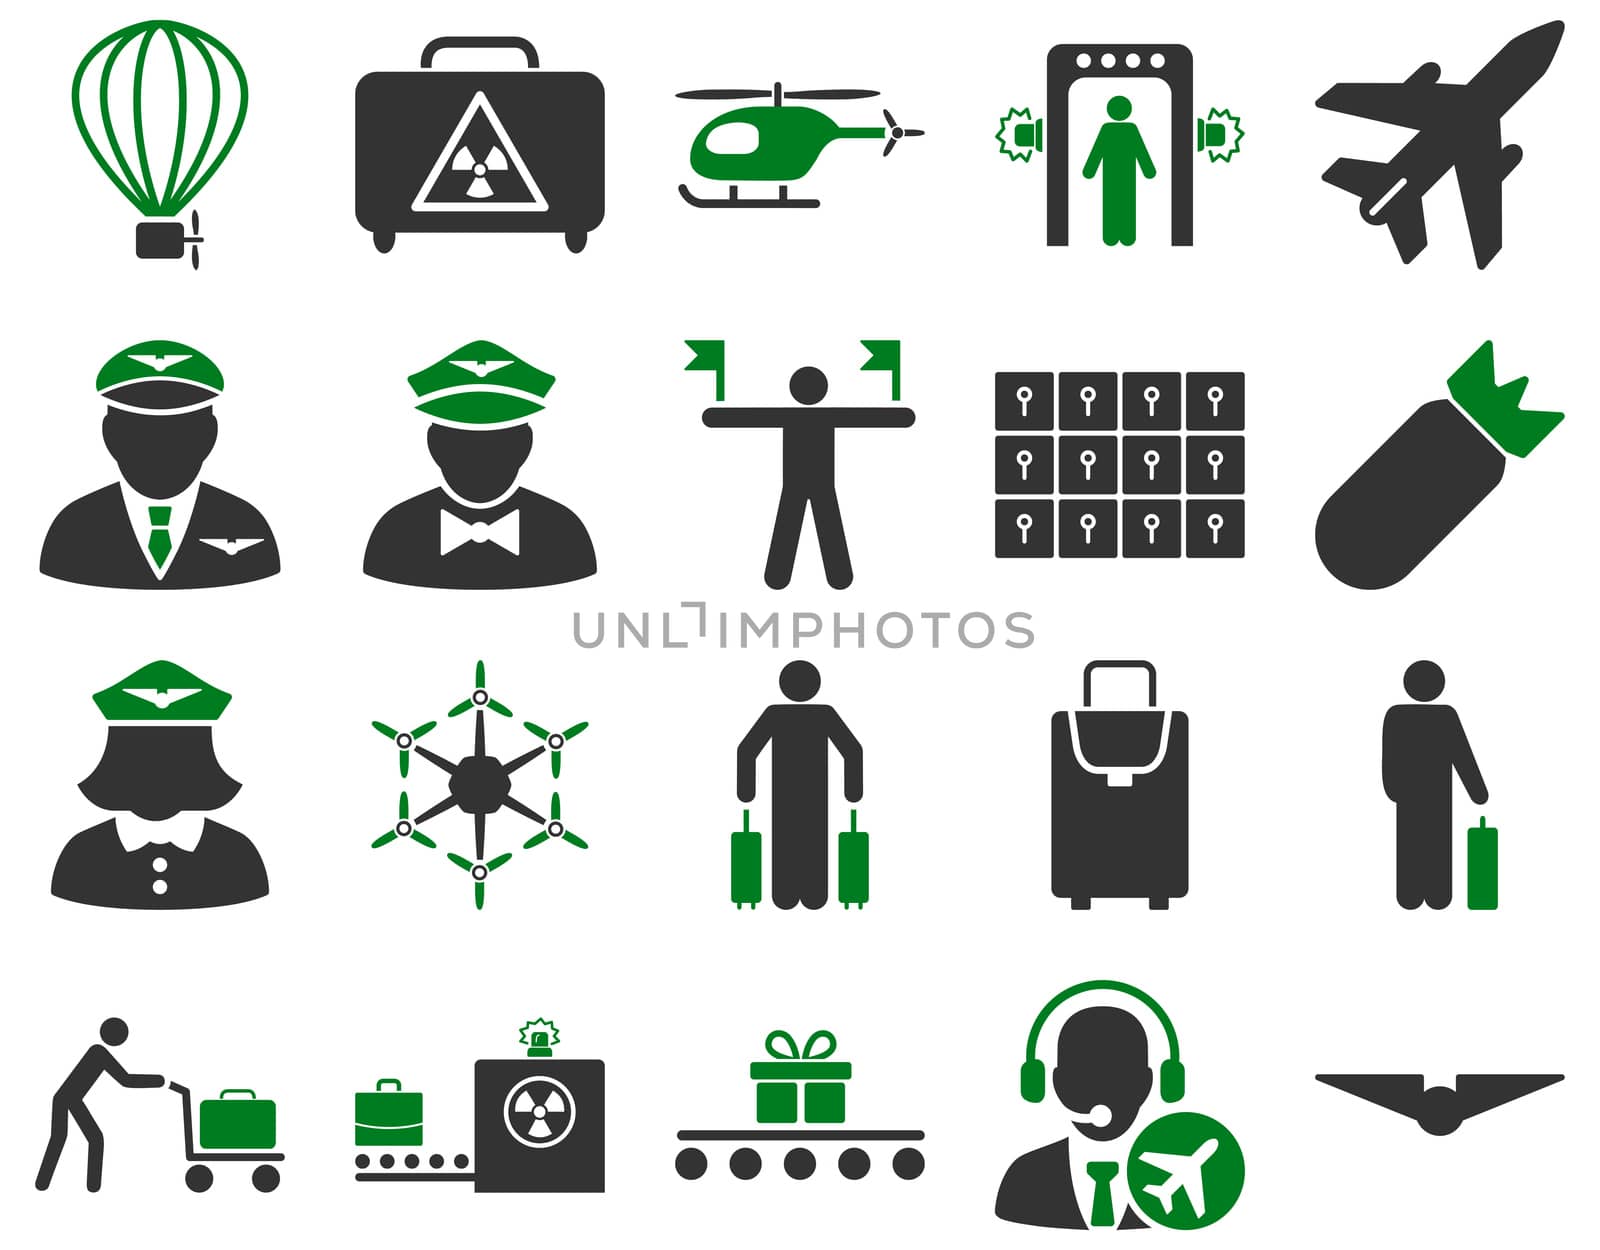 Airport Icon Set. These flat bicolor icons use green and gray colors. Raster images are isolated on a white background.